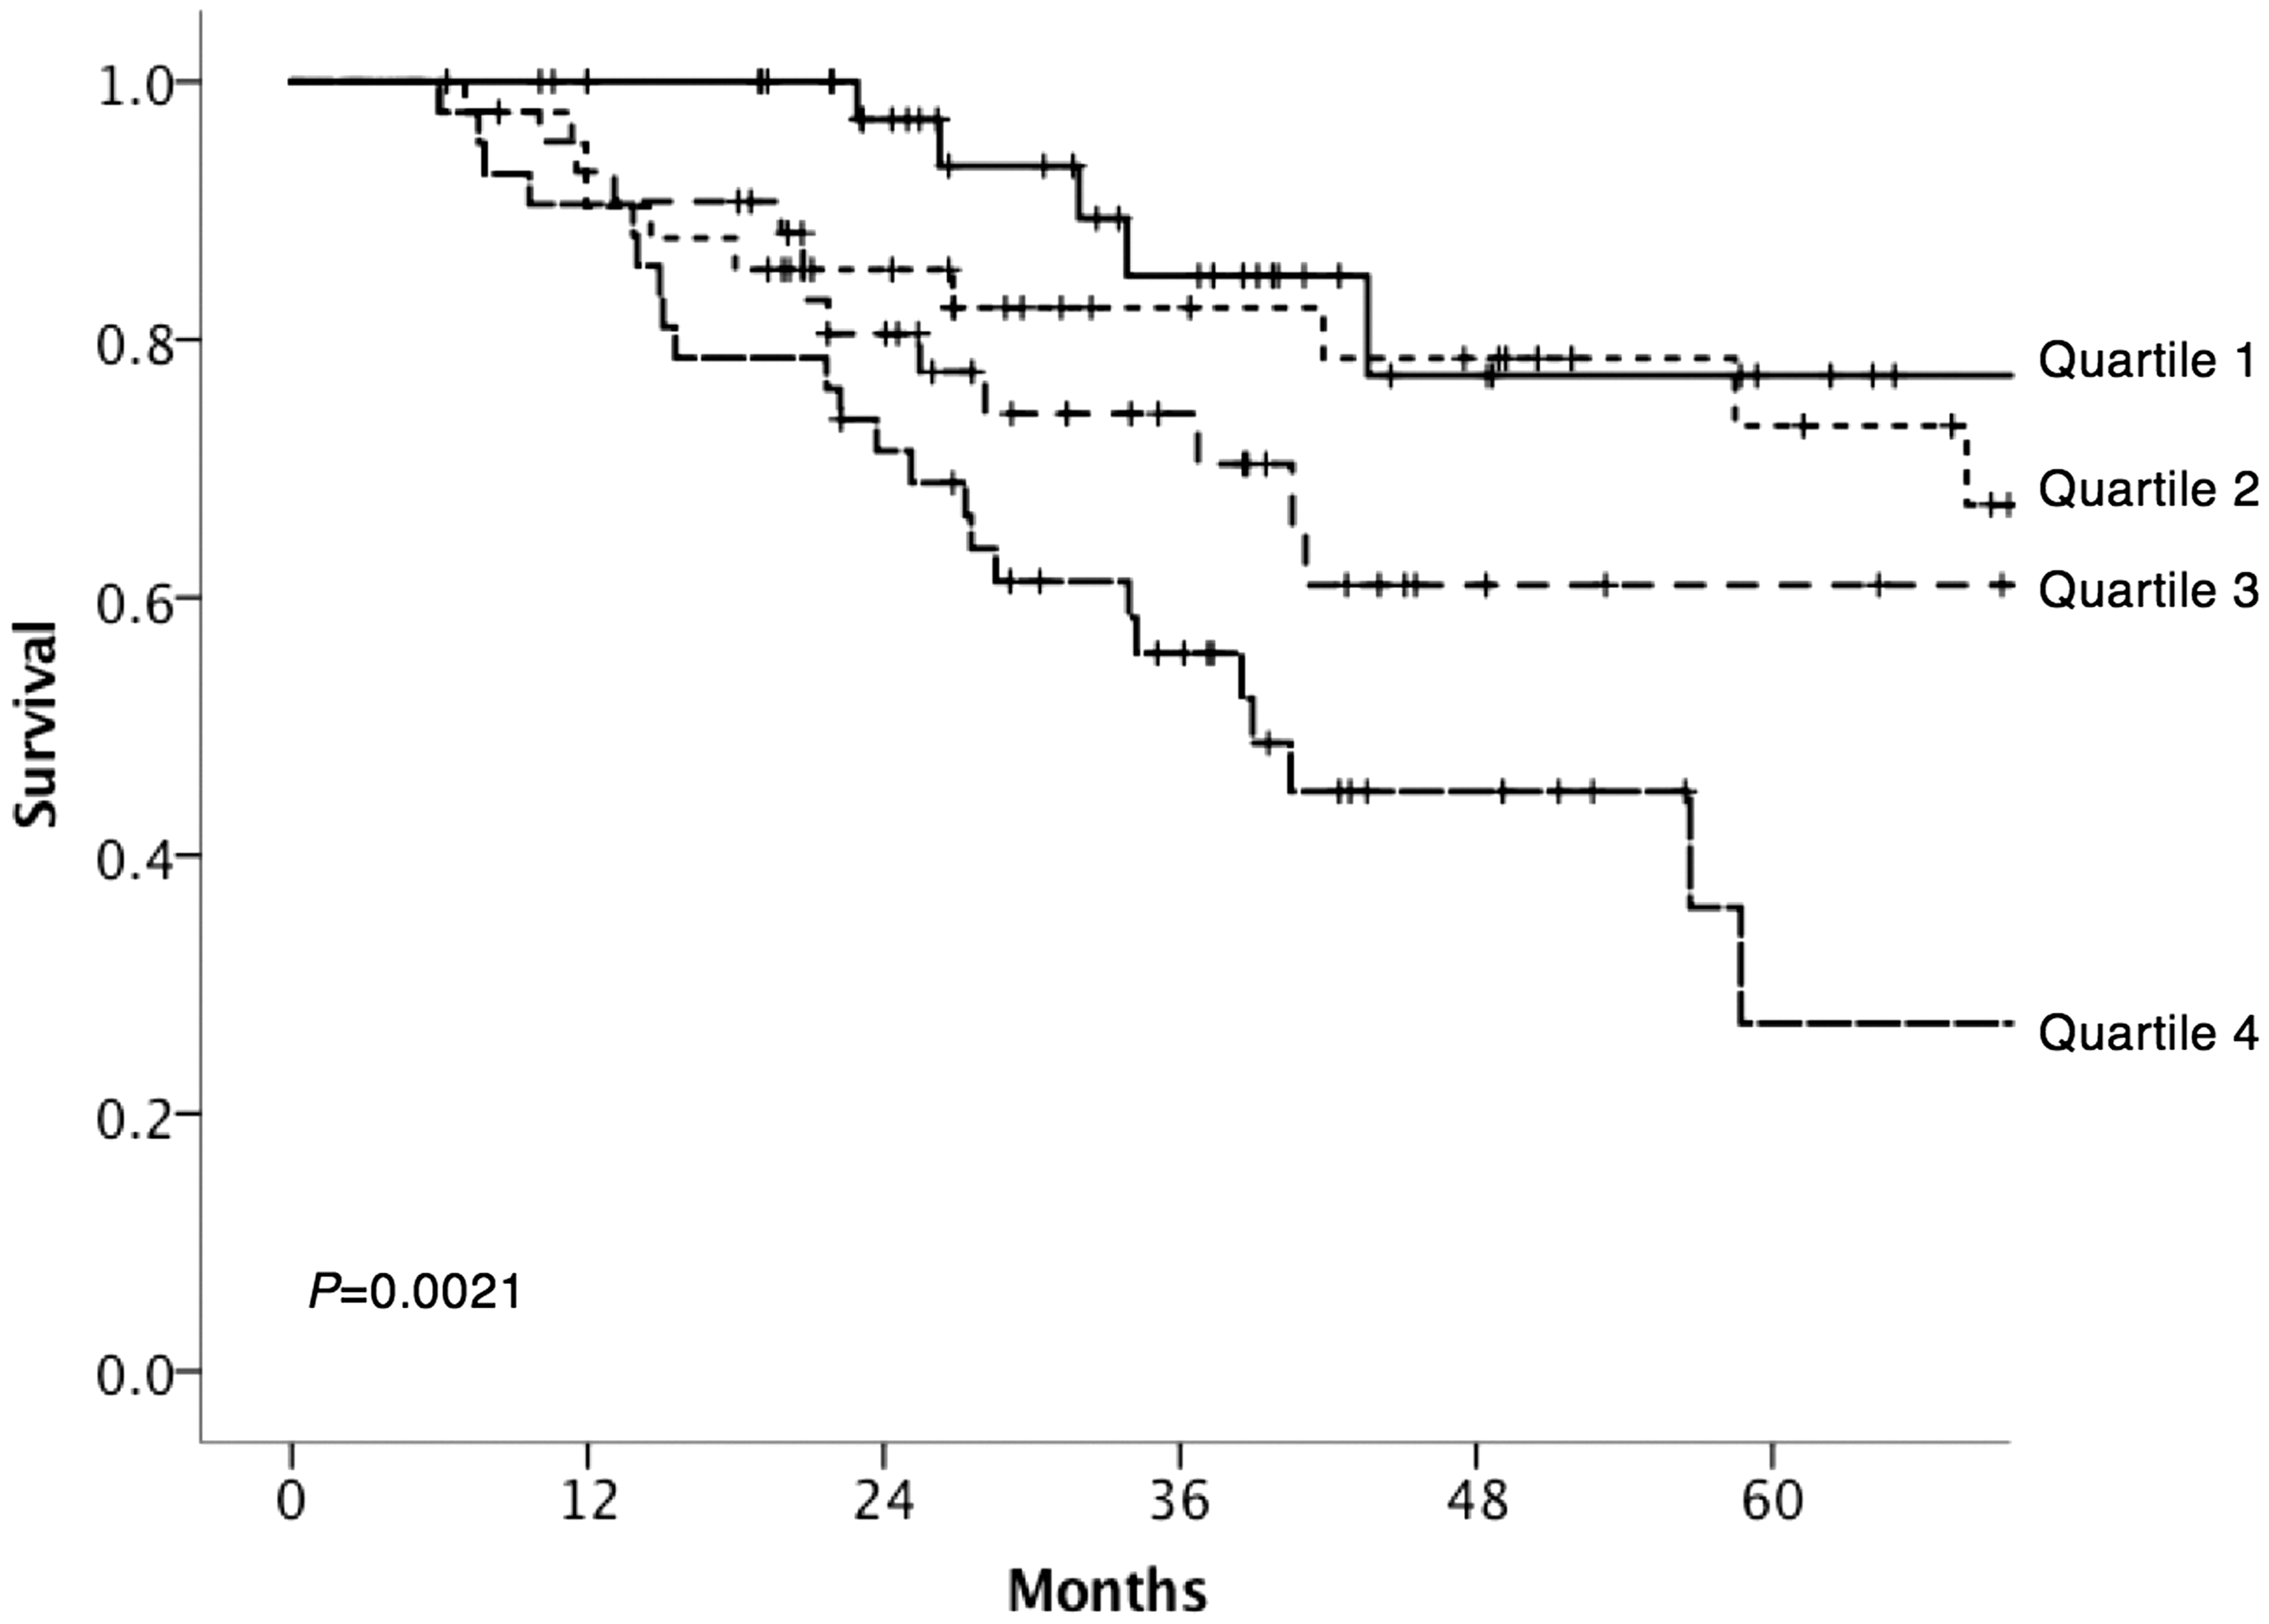 Figure 2. Kaplan–Meier estimates of cumulative overall survival rates. Patients stratified into four groups on the basis of the neutrophil–lymphocyte ratio (NLR): quartile 1 (NLR 0.85–2.34), quartile 2 (NLR 2.35–2.99), quartile 3 (NLR 3.0–3.83) and quartile 4 (NLR 3.83–12.97).